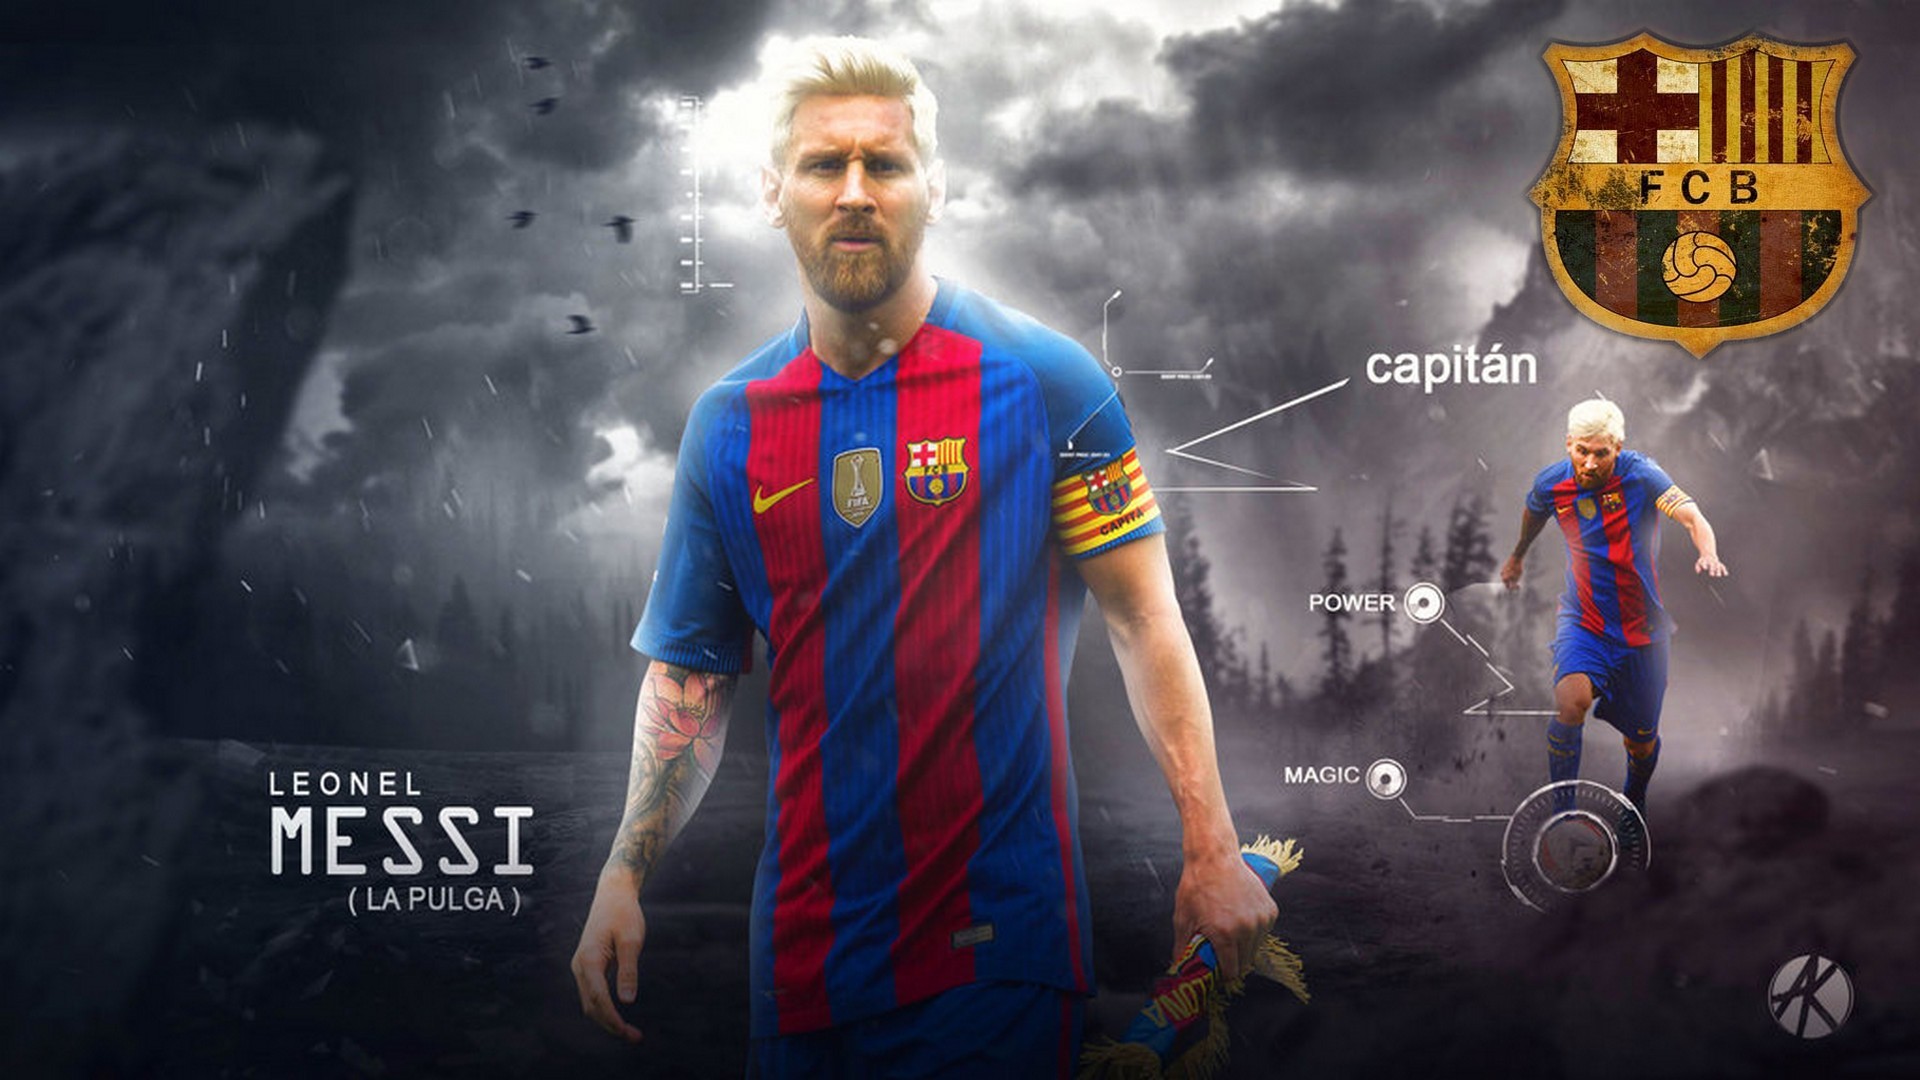 Wallpaper Desktop Messi HD With Resolution 1920X1080 pixel. You can make this wallpaper for your Mac or Windows Desktop Background, iPhone, Android or Tablet and another Smartphone device for free